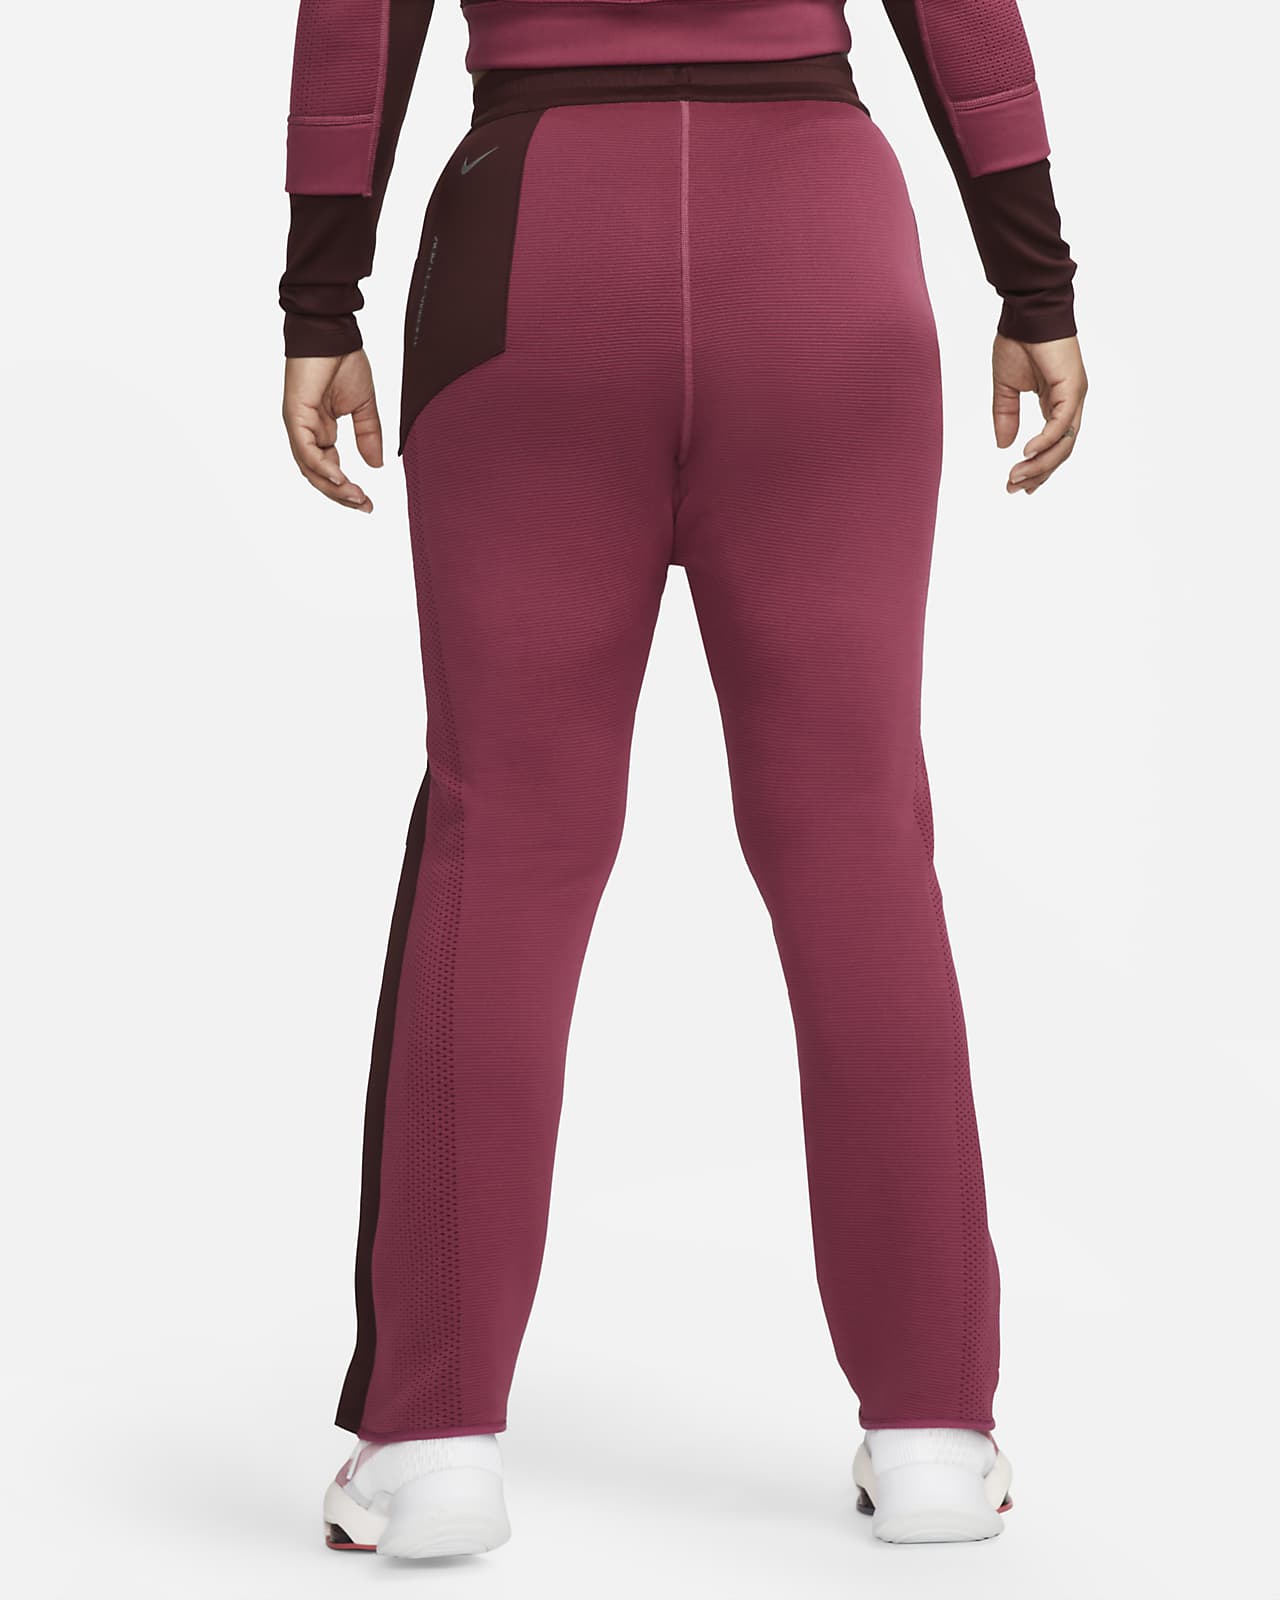 Nike Therma-Fit Run Division Pants - Running trousers Women's